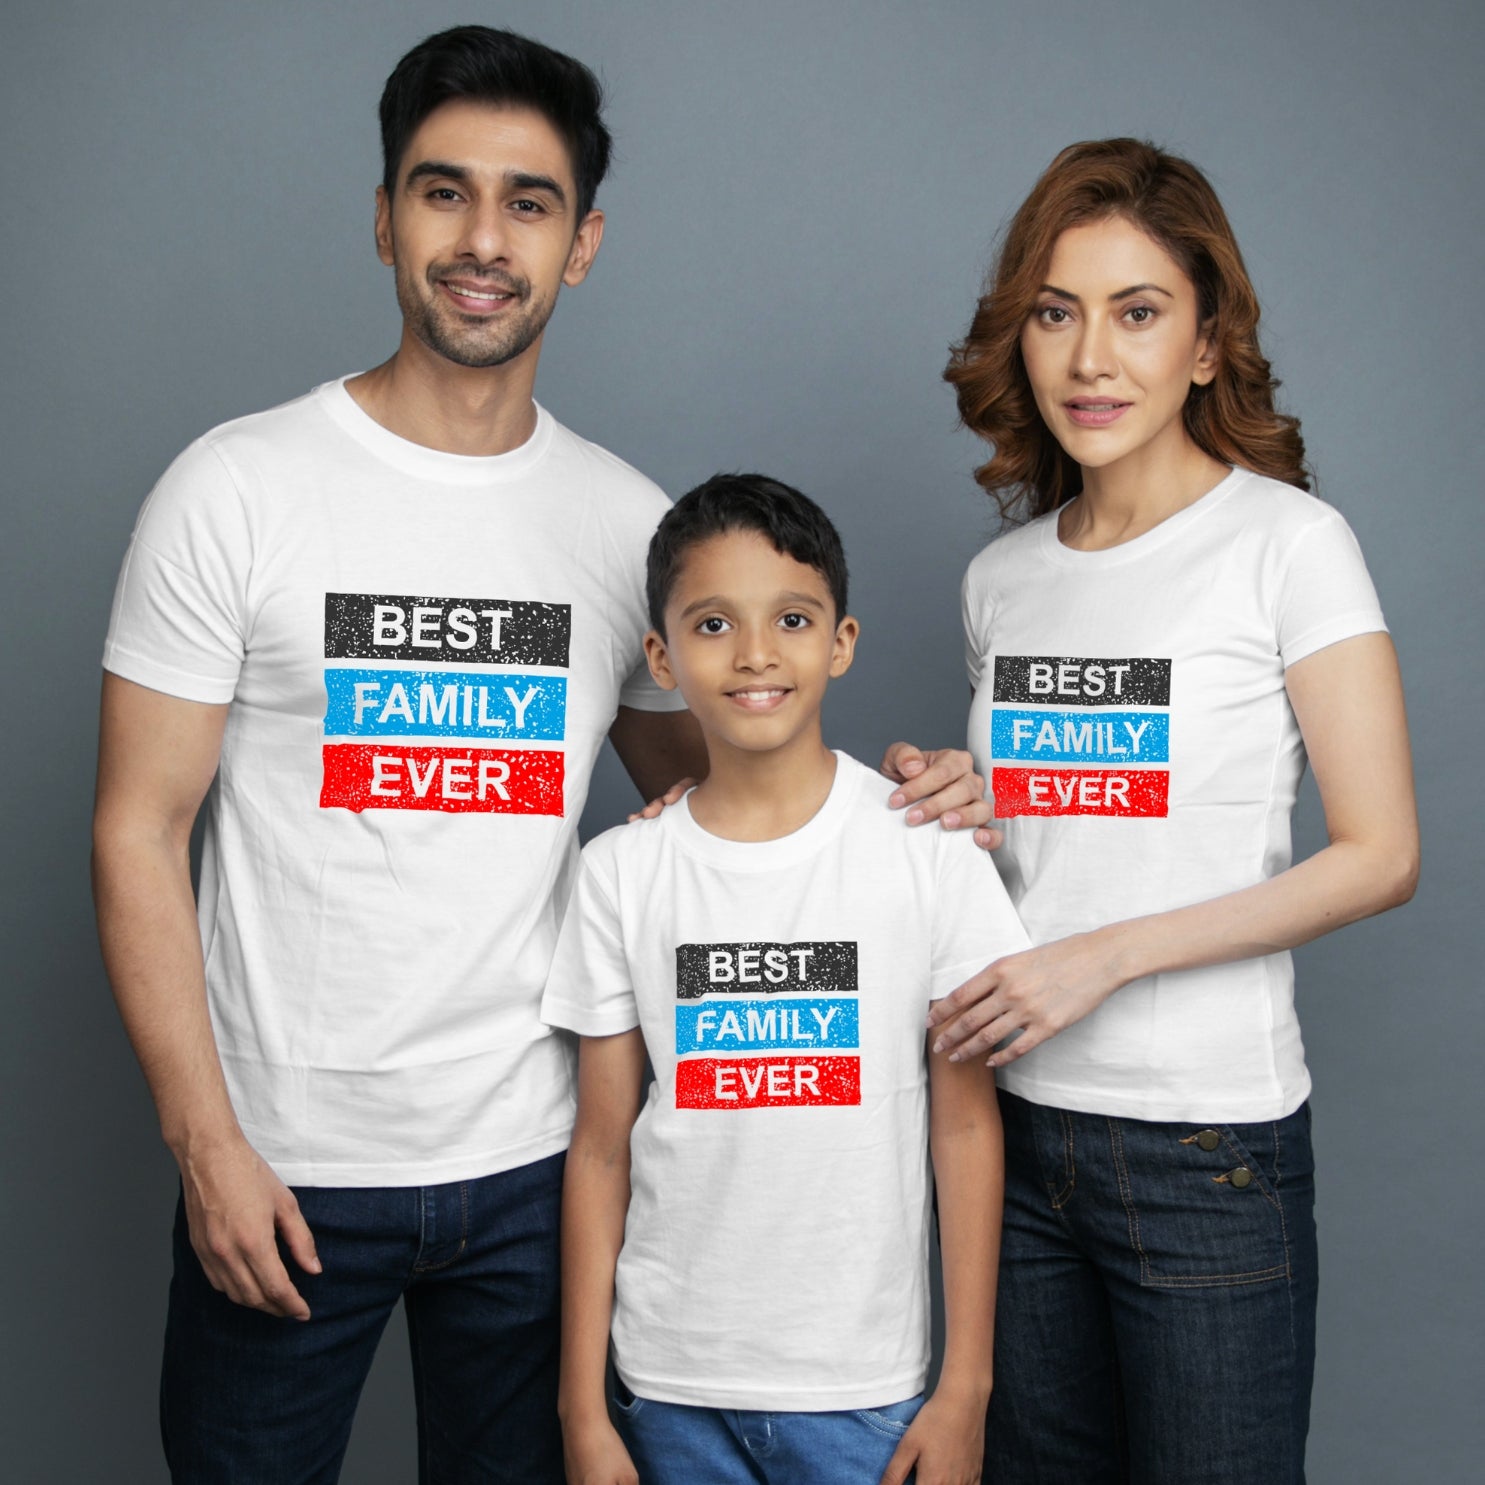 Family t shirt set of 3 Mom Dad Son in White  Colour - Best Family Ever Variant